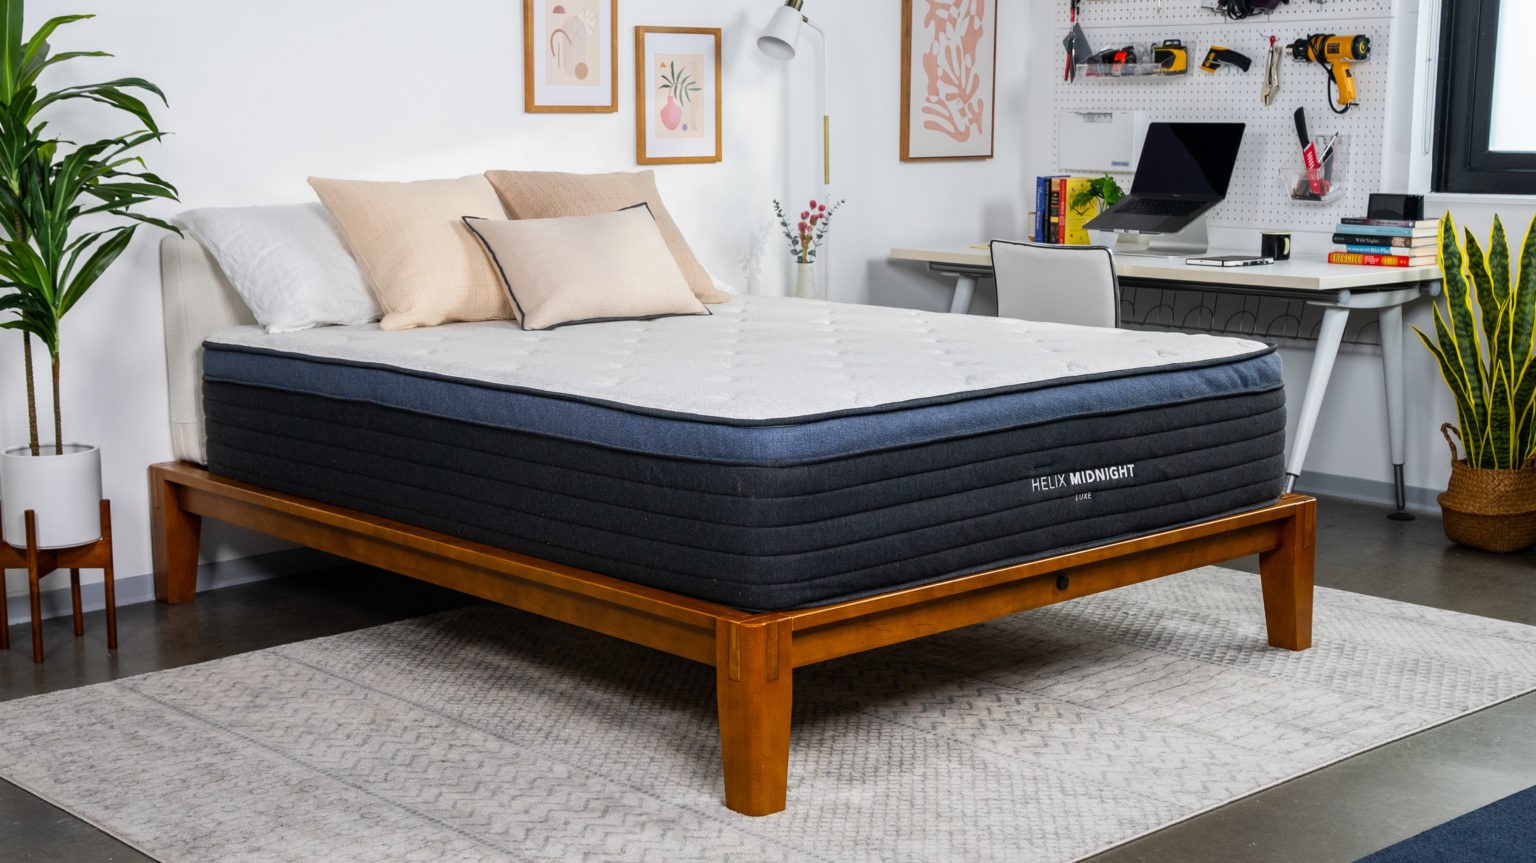 A comprehensive guide to all types of mattresses